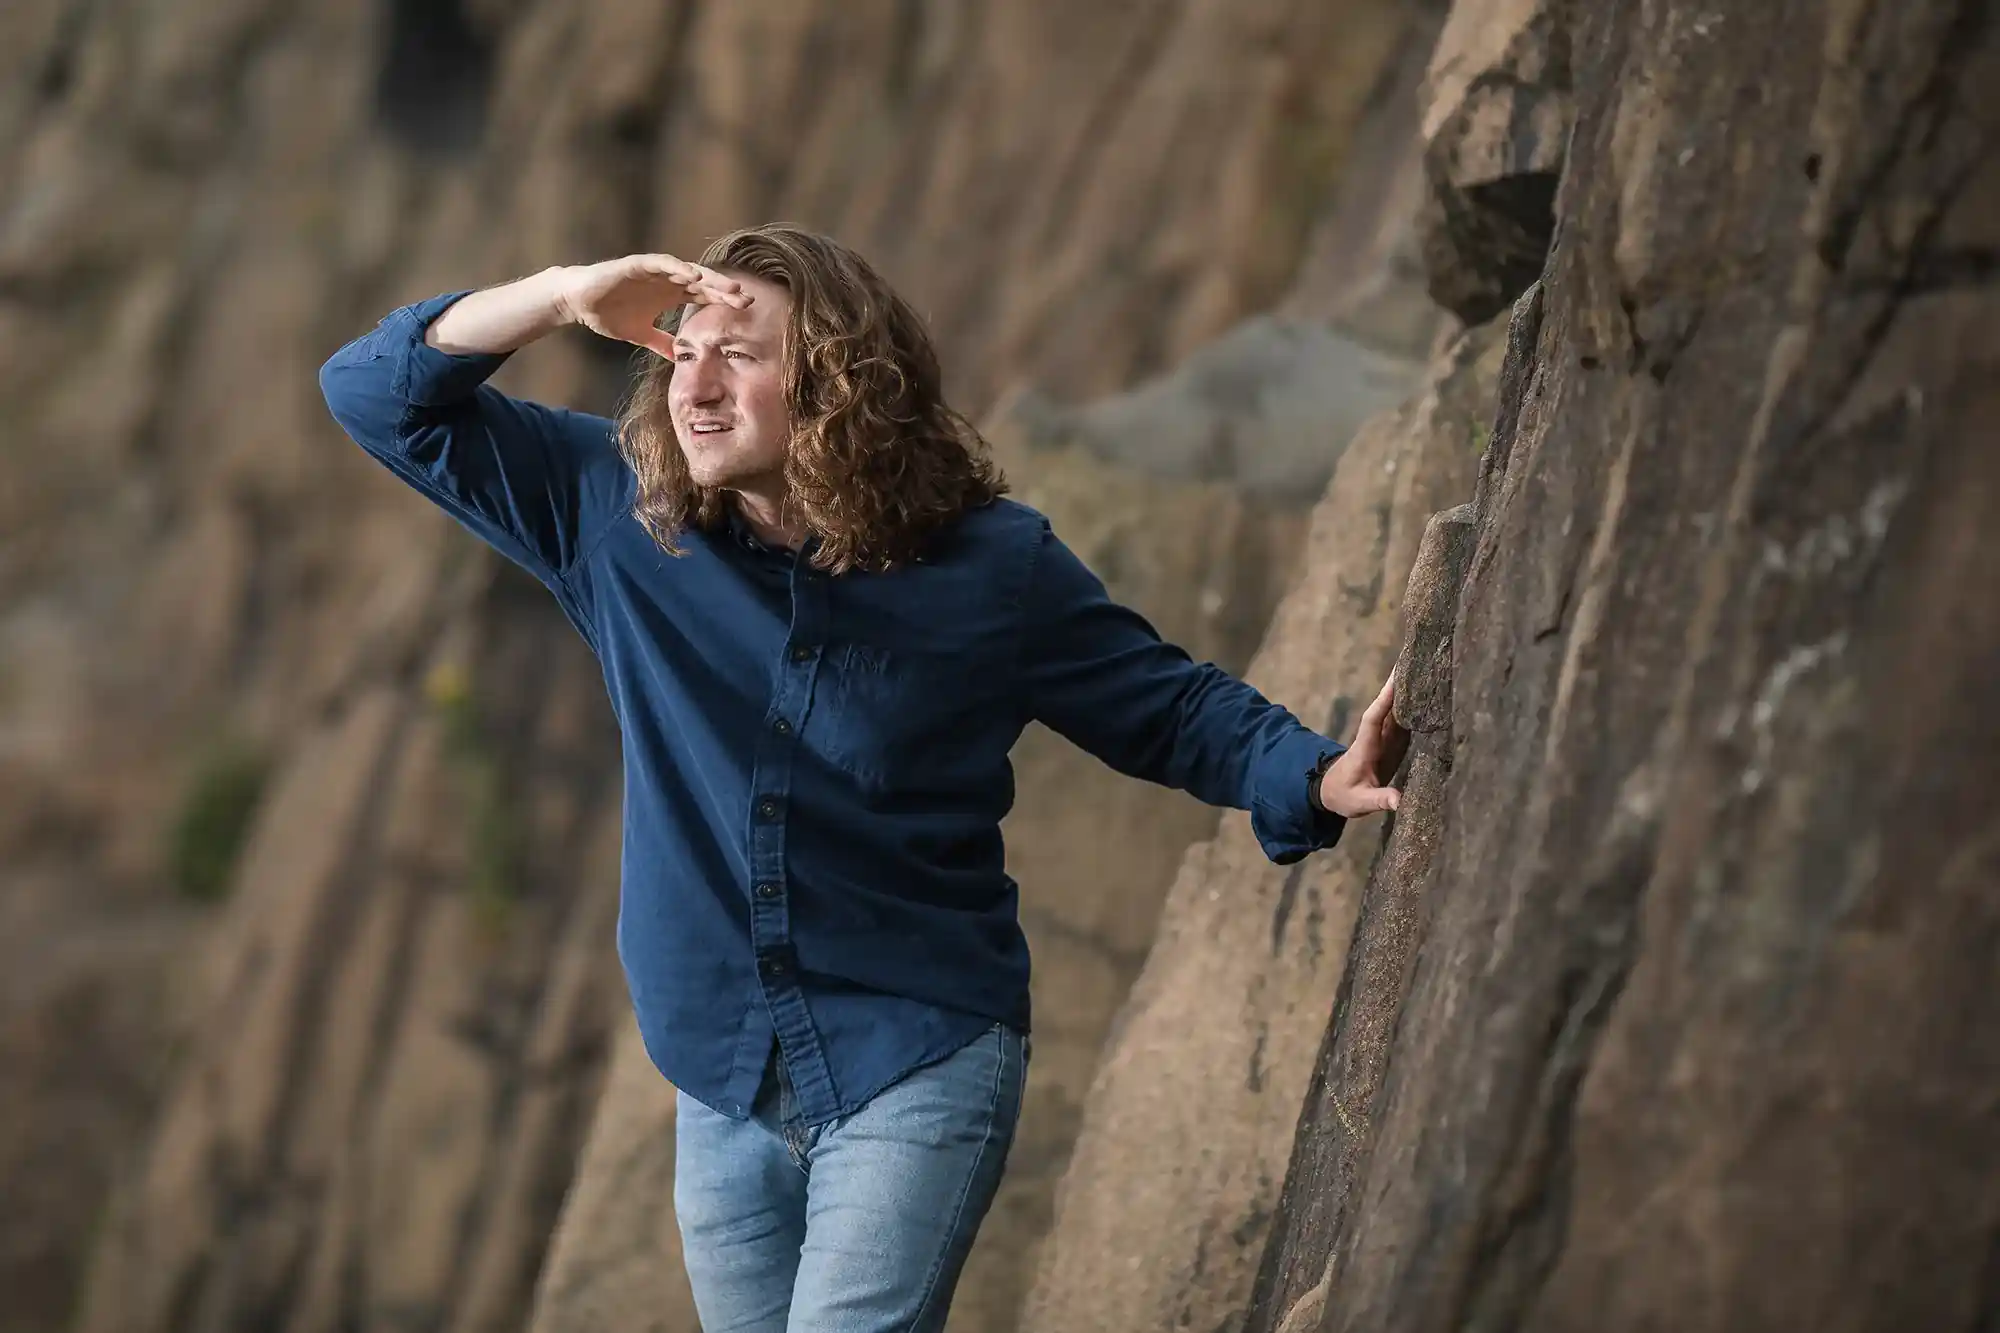 A person with long hair and wearing a blue shirt and jeans uses one hand to shield their eyes while holding onto a rock face with the other hand.